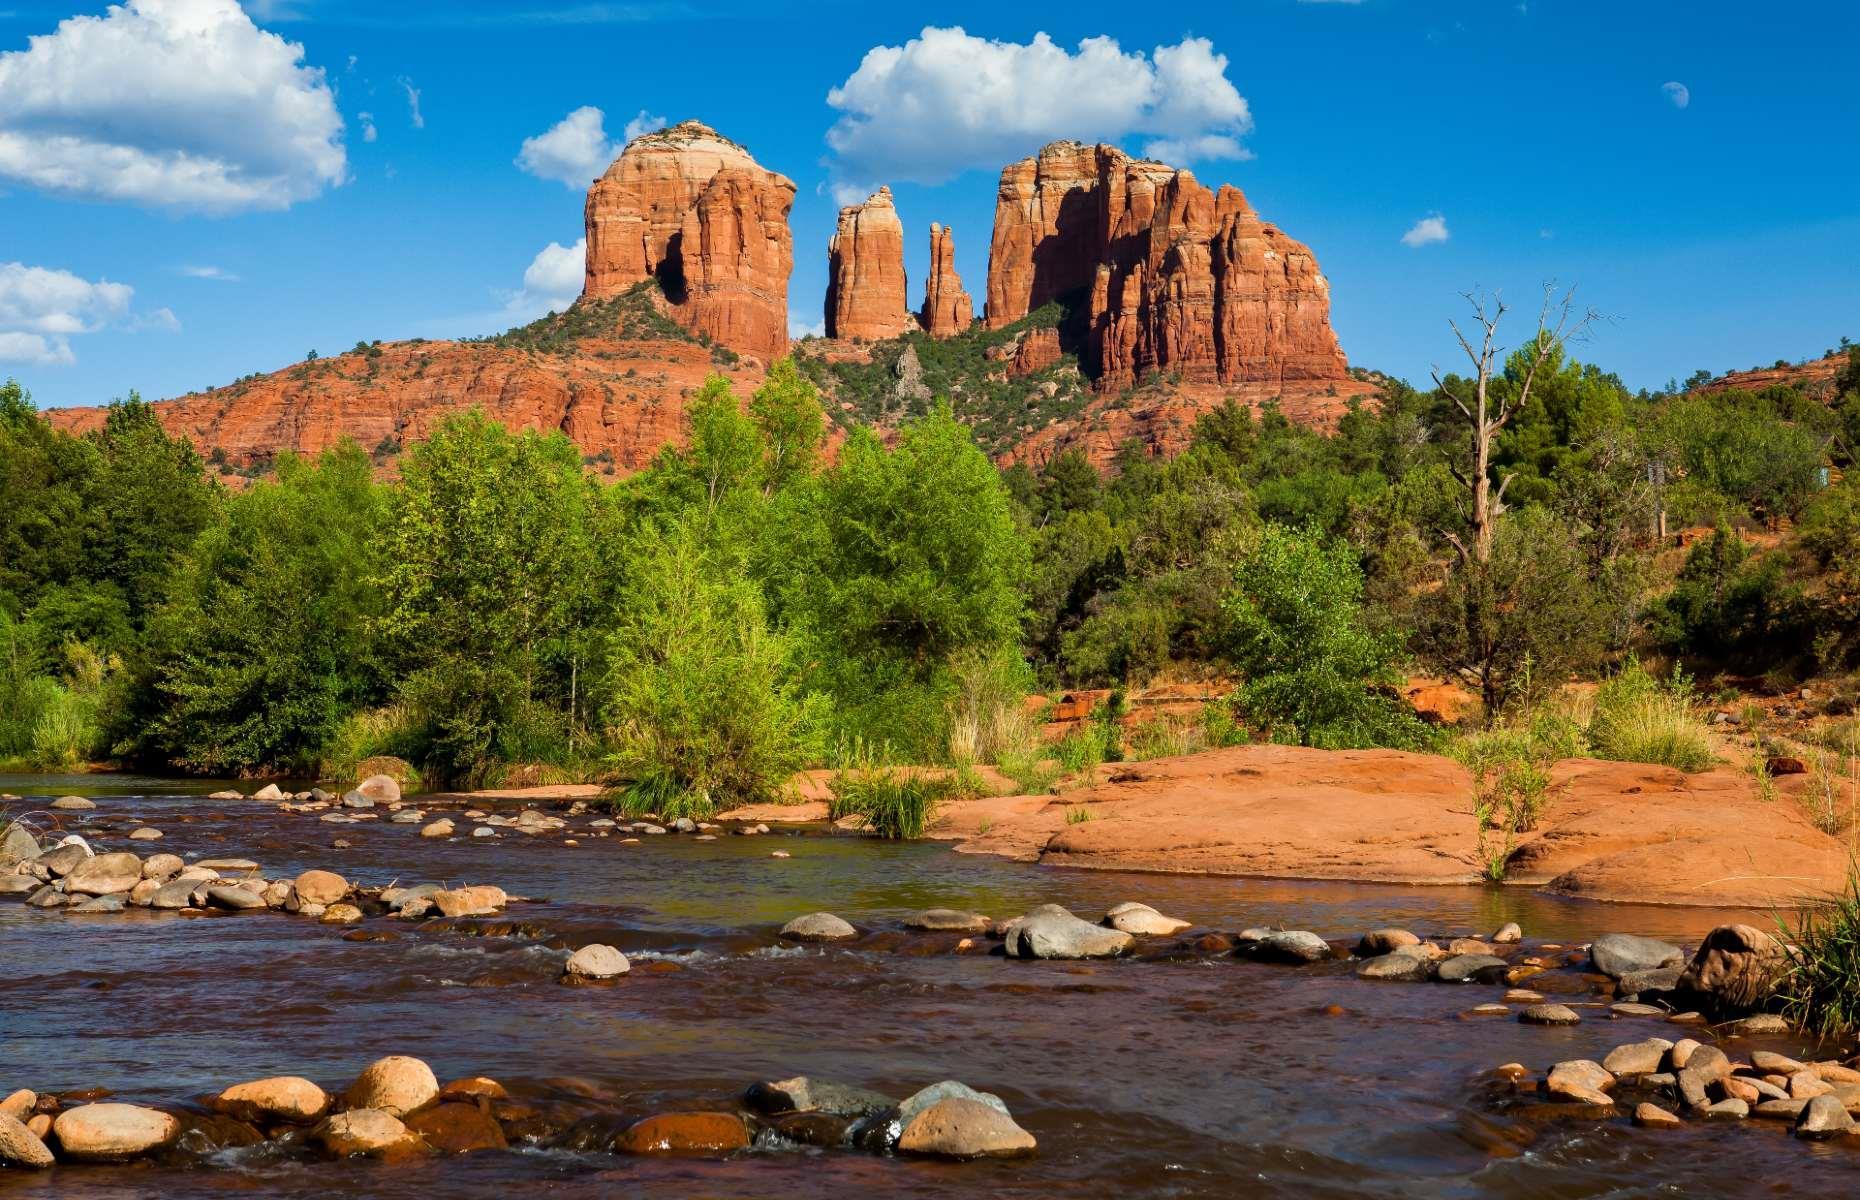 Home to the Grand Canyon, Monument Valley and the Petrified Forest National Park, Arizona ranks highly on many visitors’ wish lists thanks to its breathtaking desert landscapes. But it has plenty to offer besides, including vibrant cities teeming with culture, one-of-a-kind museums and historic mining towns. We’ve rounded up its 30 most unmissable attractions.